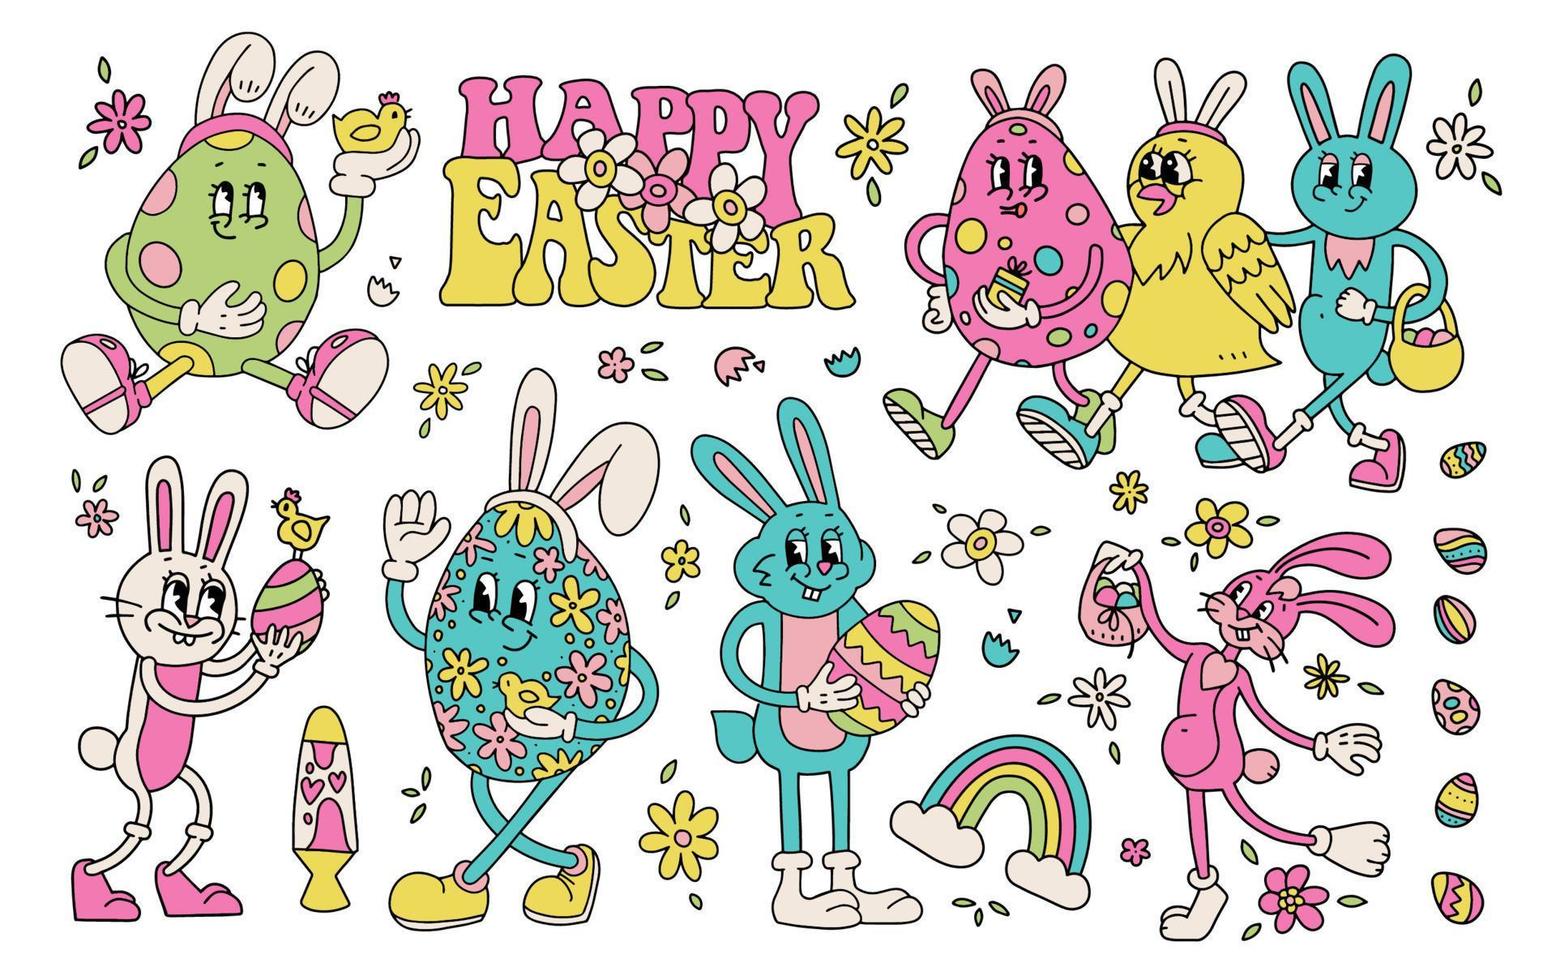 Hippie retro cartoon gloved characters in groovy 70s-80s style. Cute vintage mascots witbasketa and flowers . Vivid floral Easter elements. Vector doodle illustration.